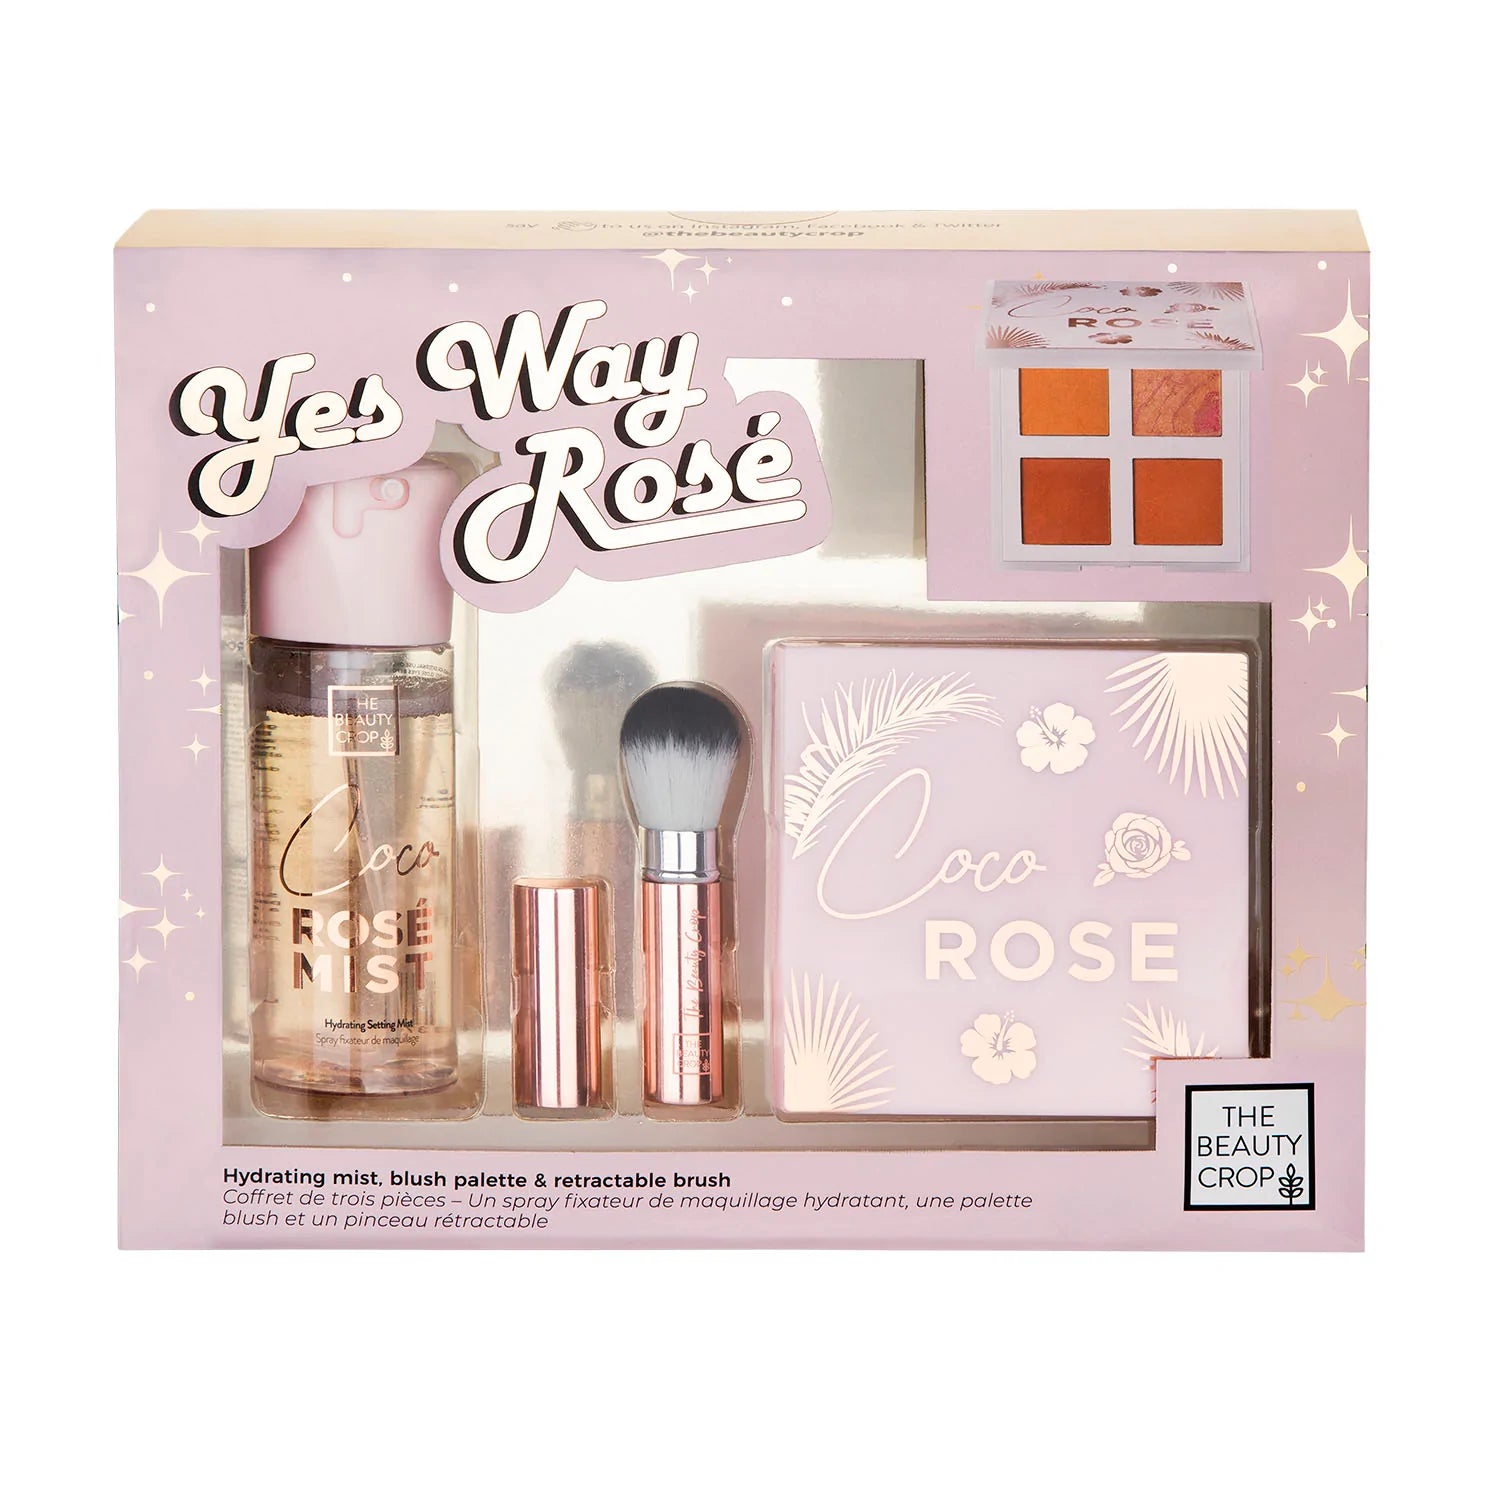 The Beauty Crop - Yes Way Rose Set